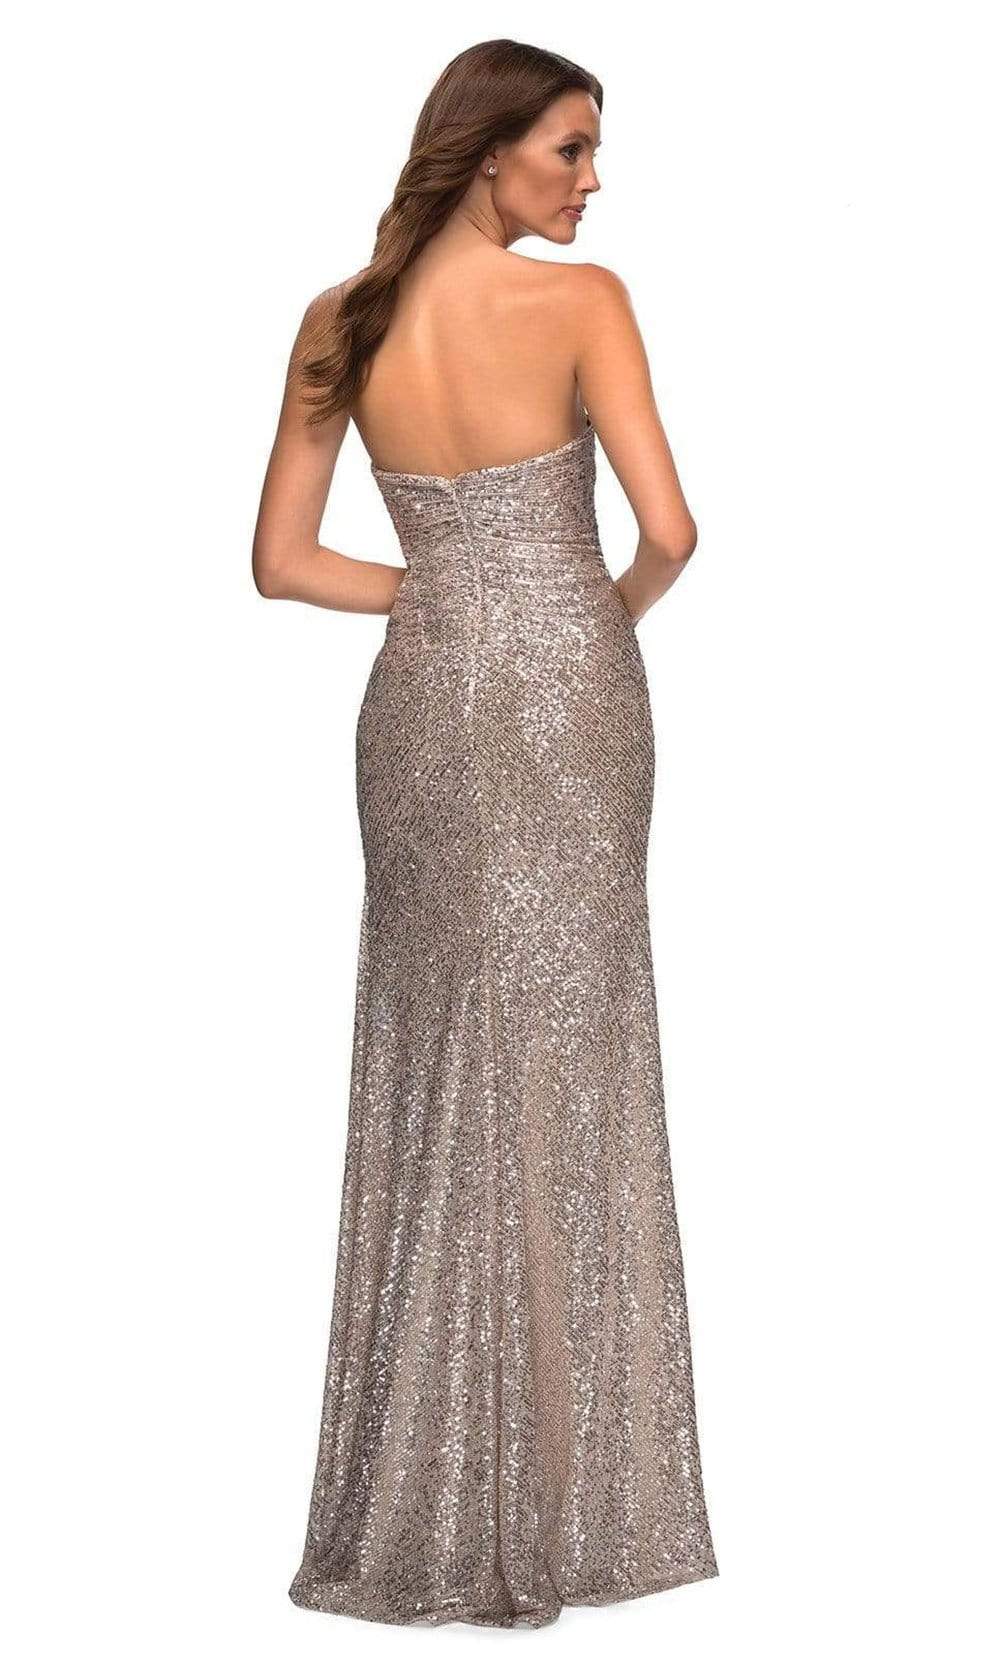 La Femme - 29675 Ruched Sequin Gown with Slit Special Occasion Dress